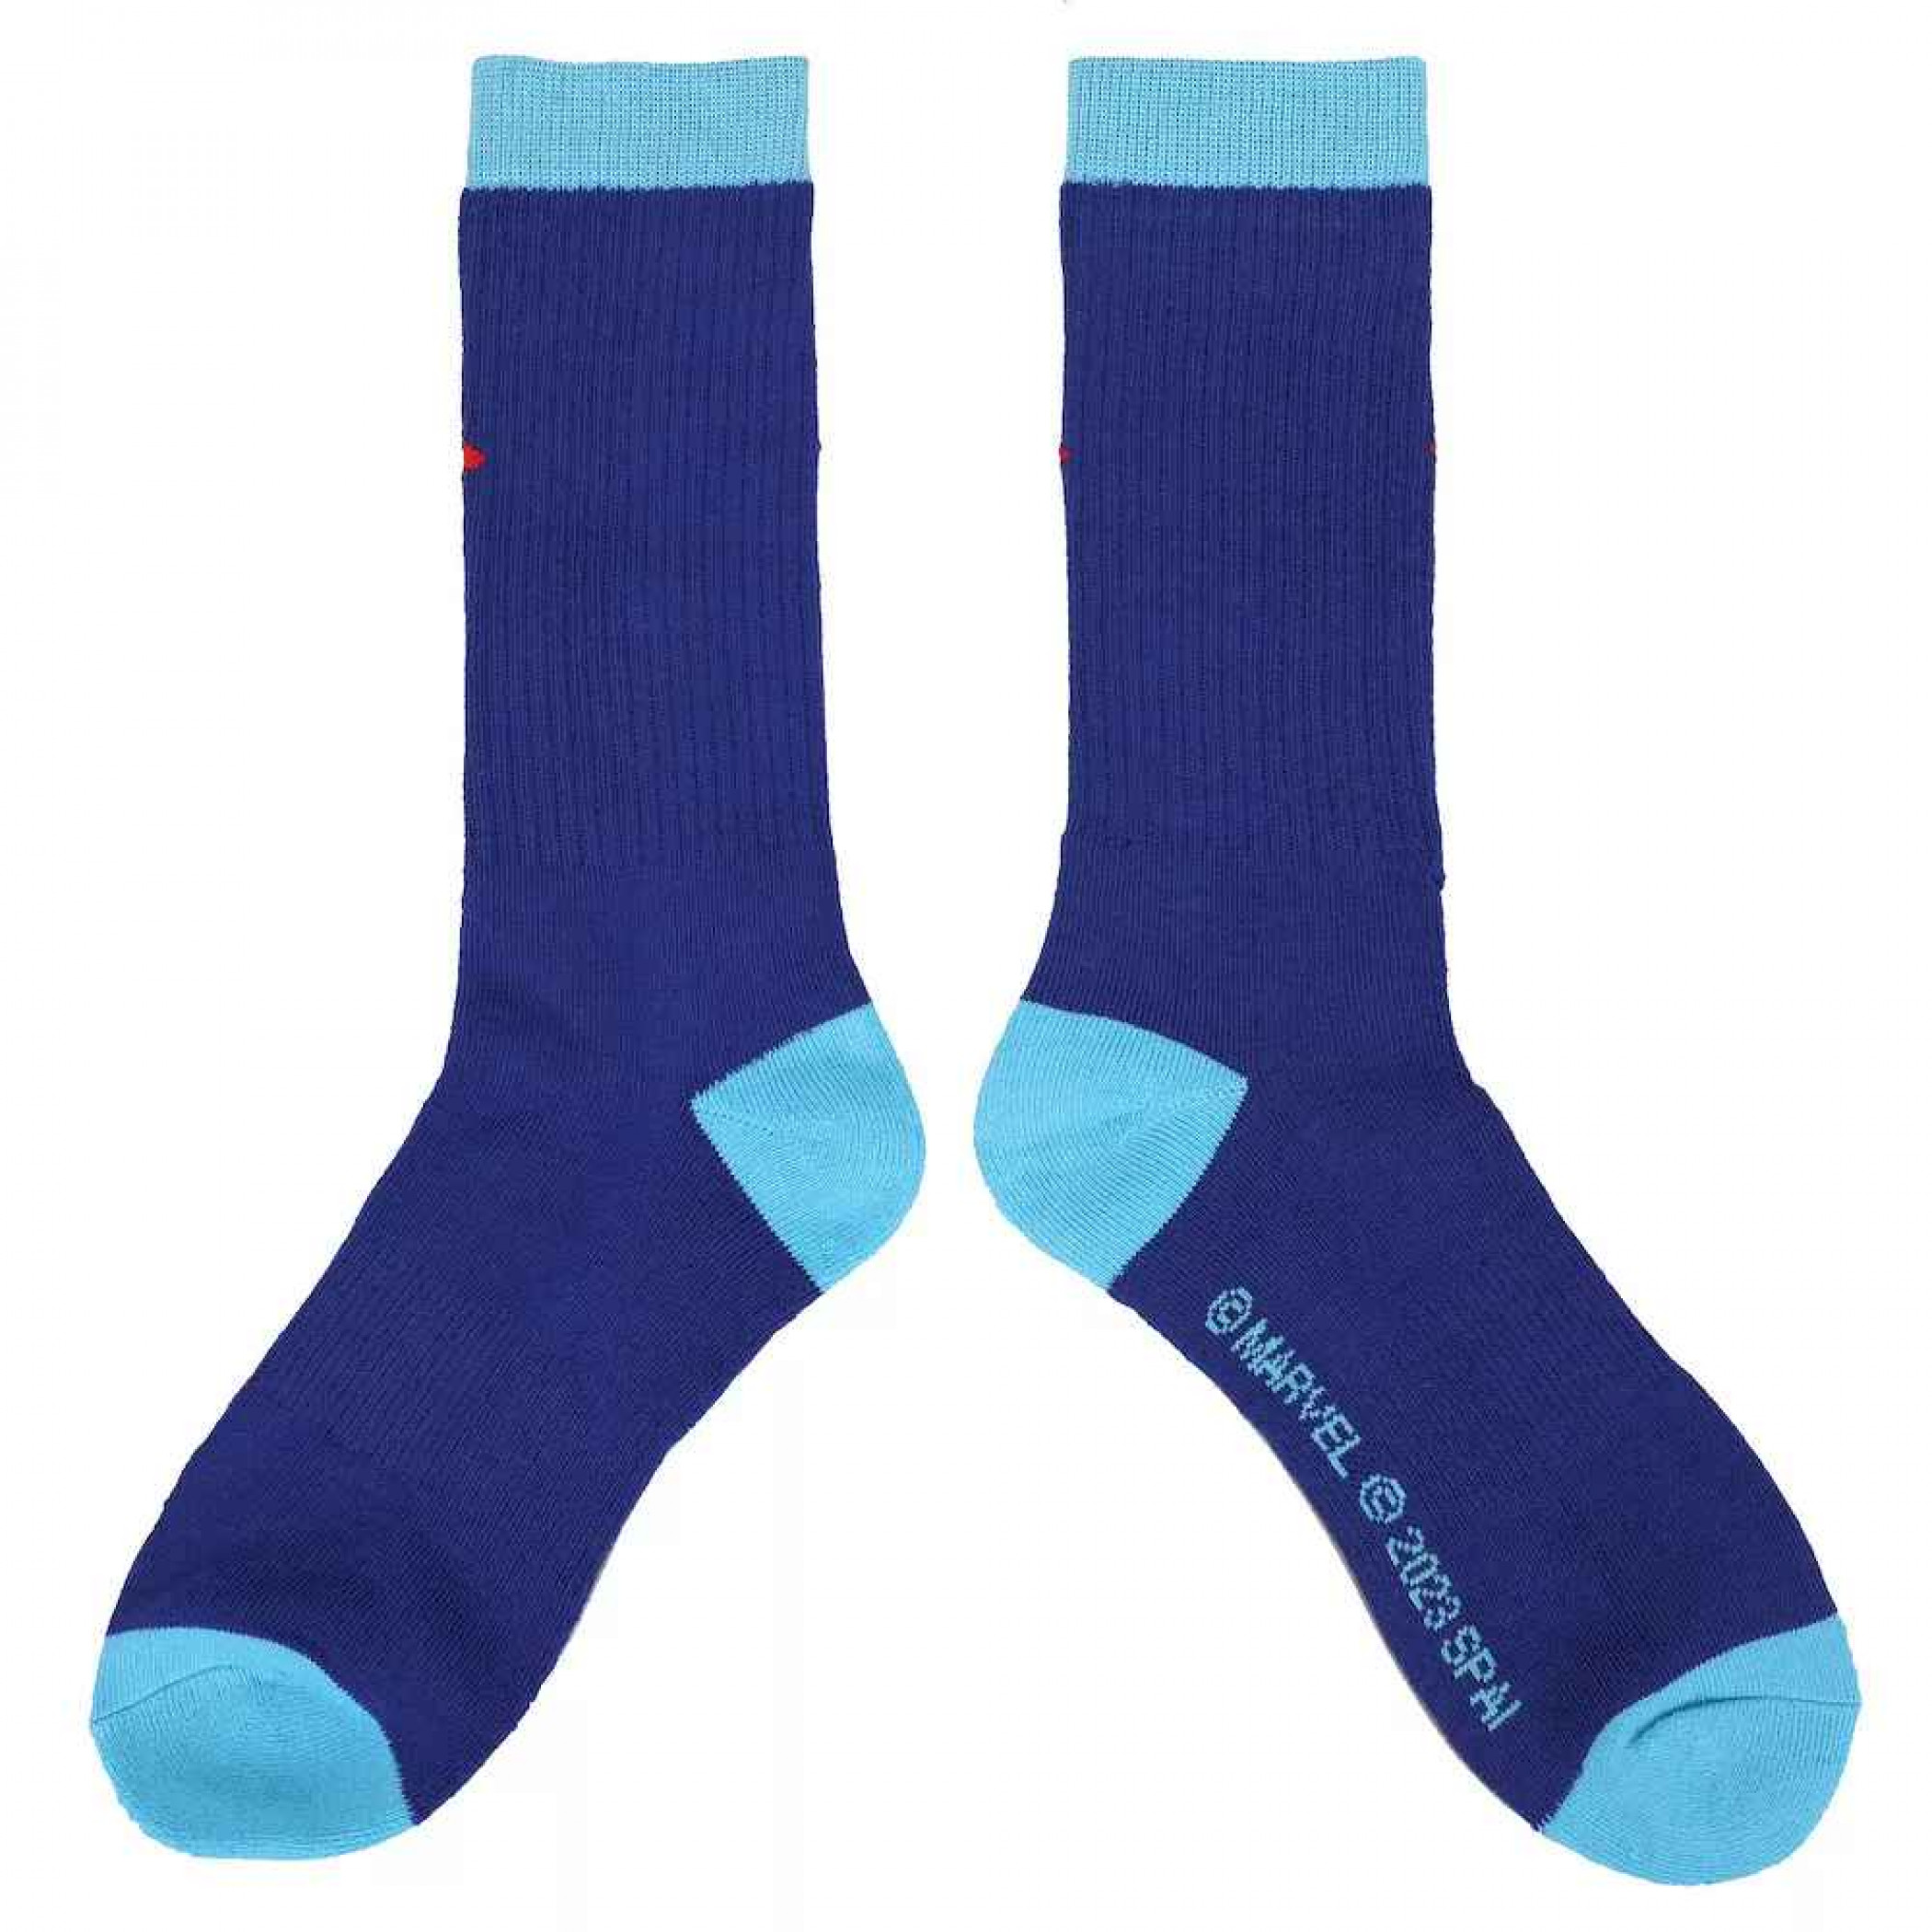 Spider-Man Across The Spider-Verse 3-Pair Pack of Crew Socks